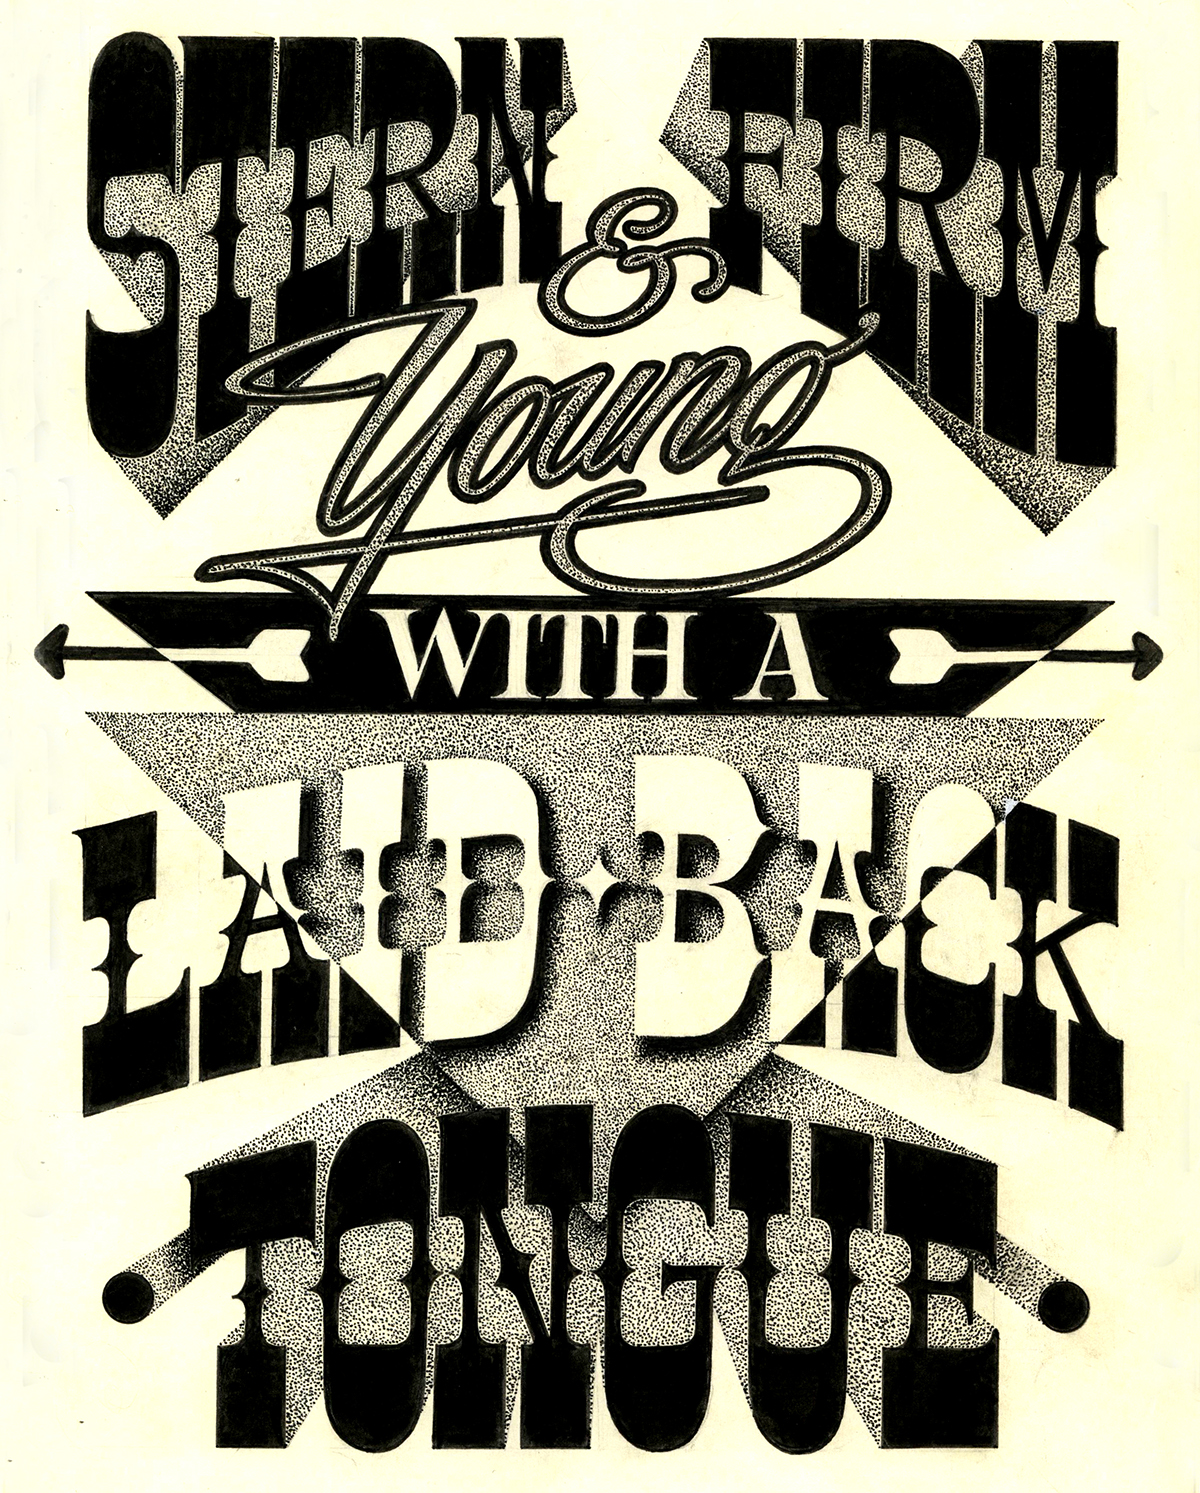 HAND LETTERING frisso   carl fredrik angell tribe called quest type western dots